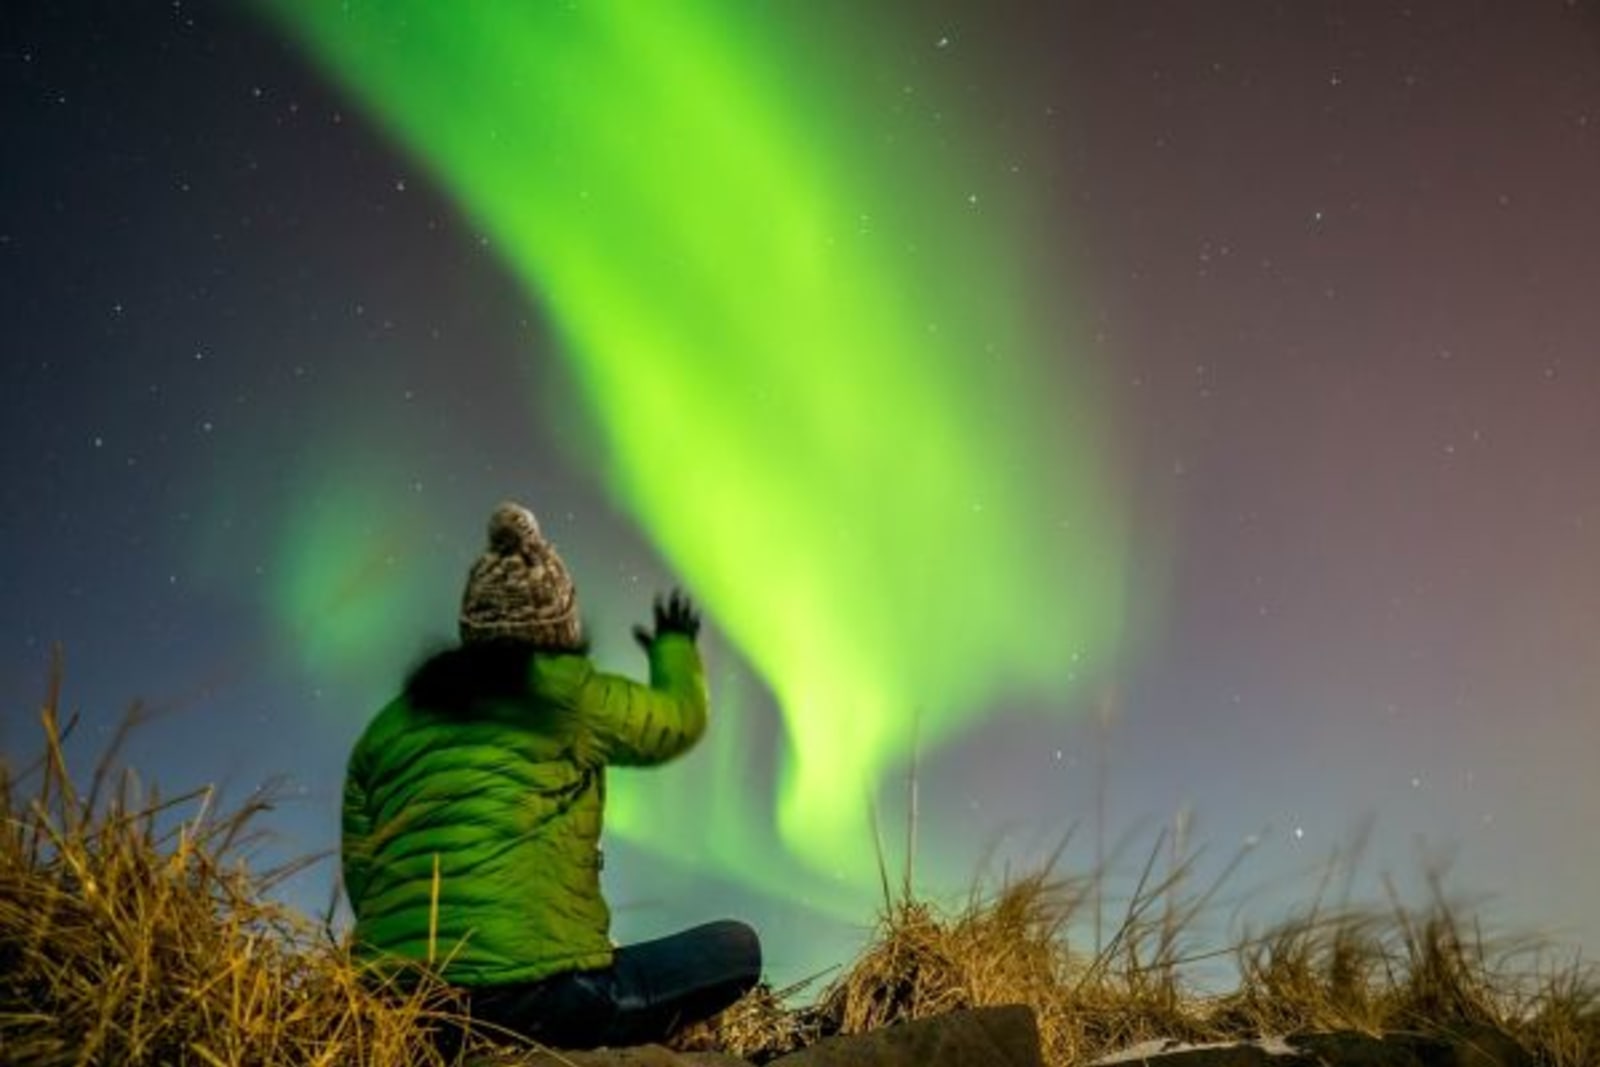 Woman sitting on grass looking up at Northern Lights